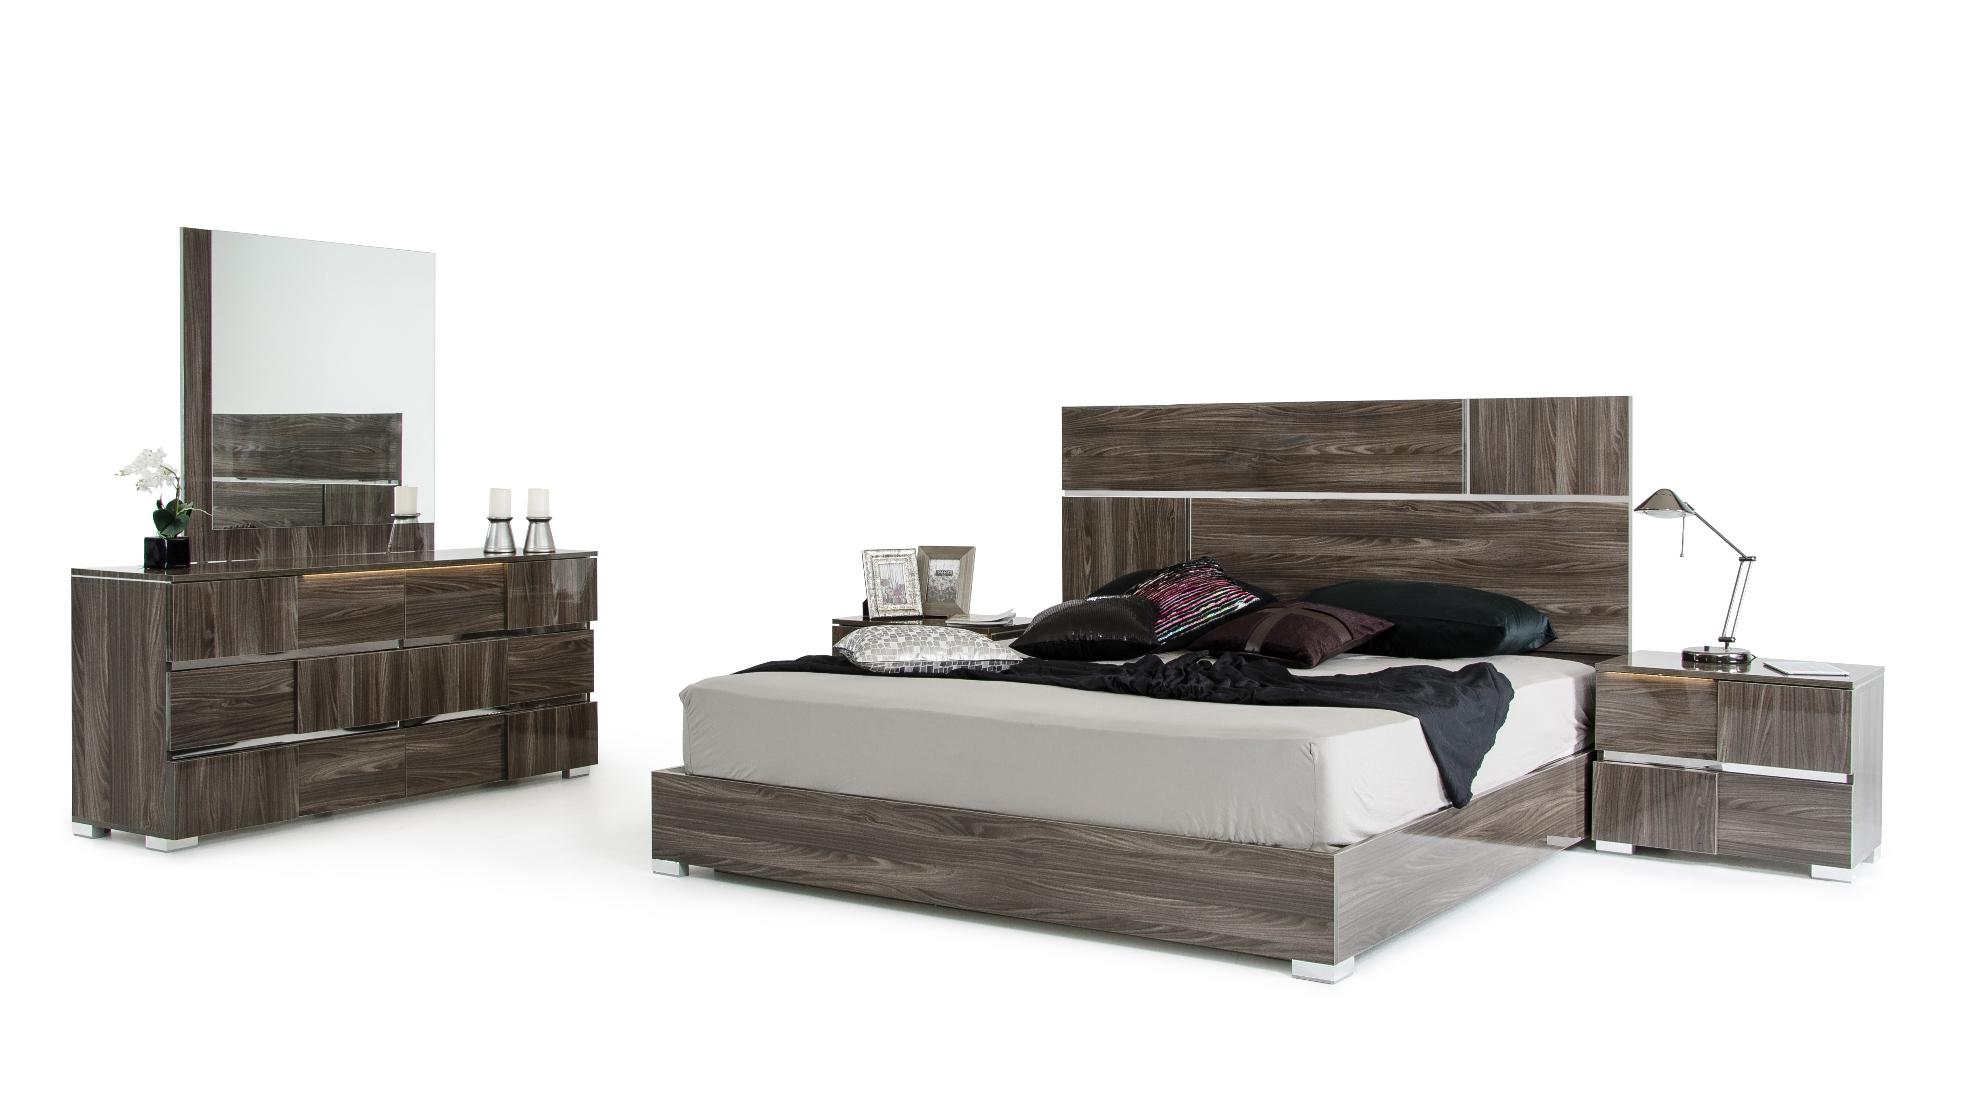 

    
VGACPICASSO-BED-GRY-CK-Set-3 VIG Modrest Picasso Elm Grey Lacquer Finish Cal King Bedroom Set 3 Made In Italy
